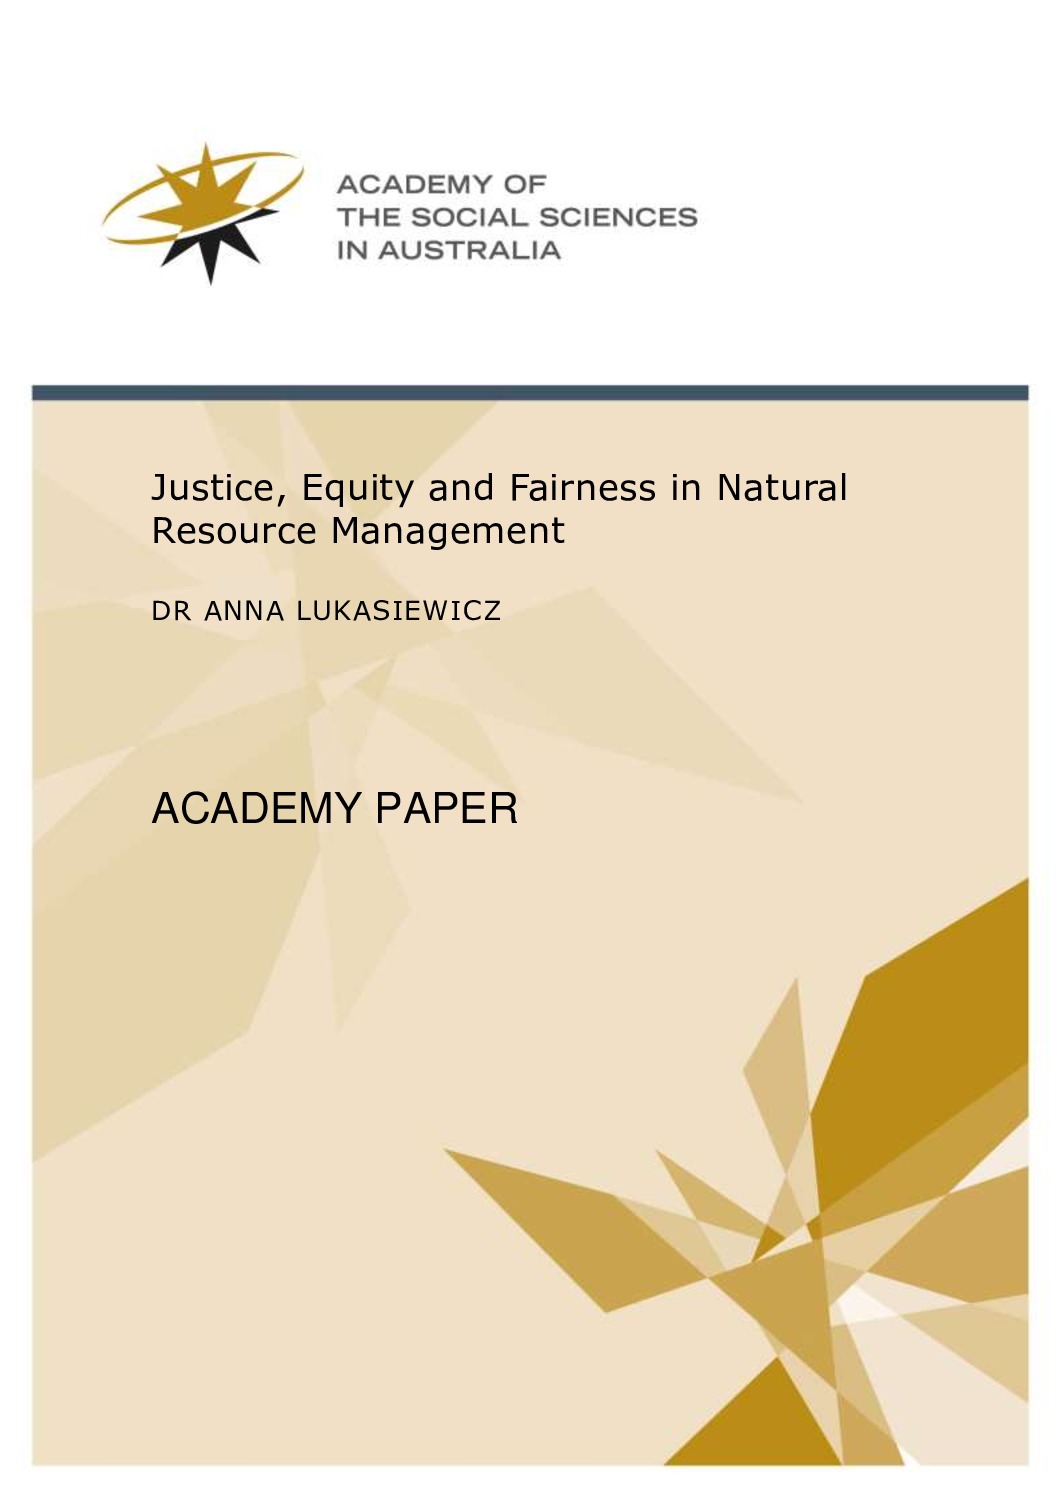 Academy Papers 1/2016- Justice, Equity and Fairness in Natural Resource Management